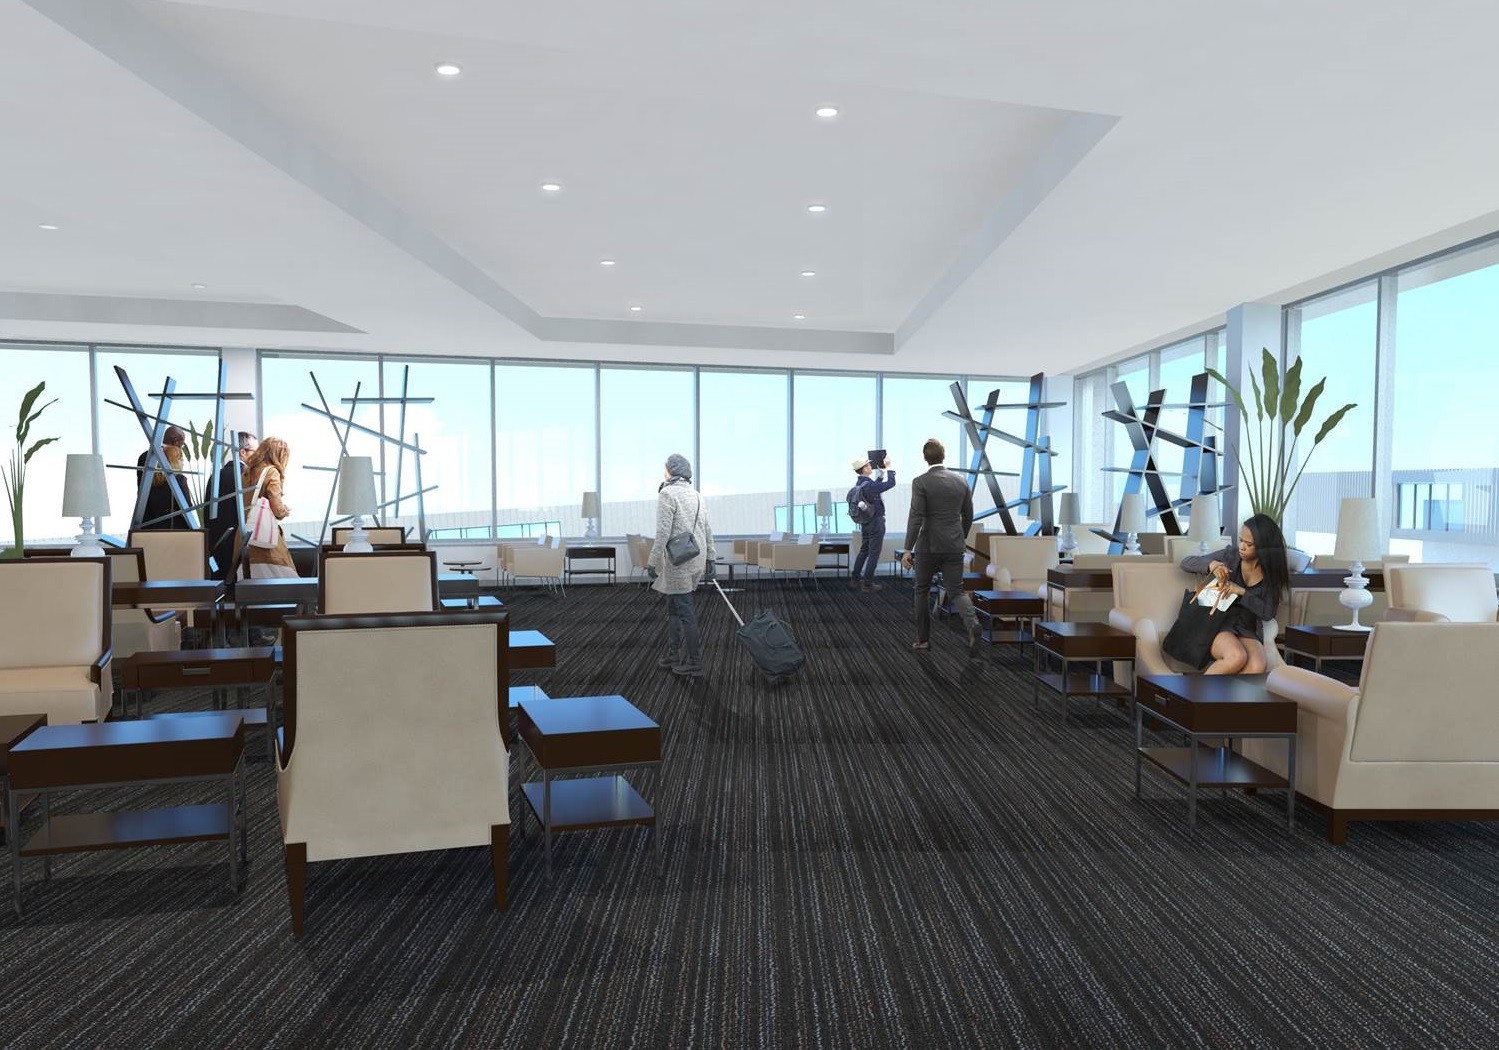 Fit-out begins at £80m Edinburgh Airport expansion : January 2018